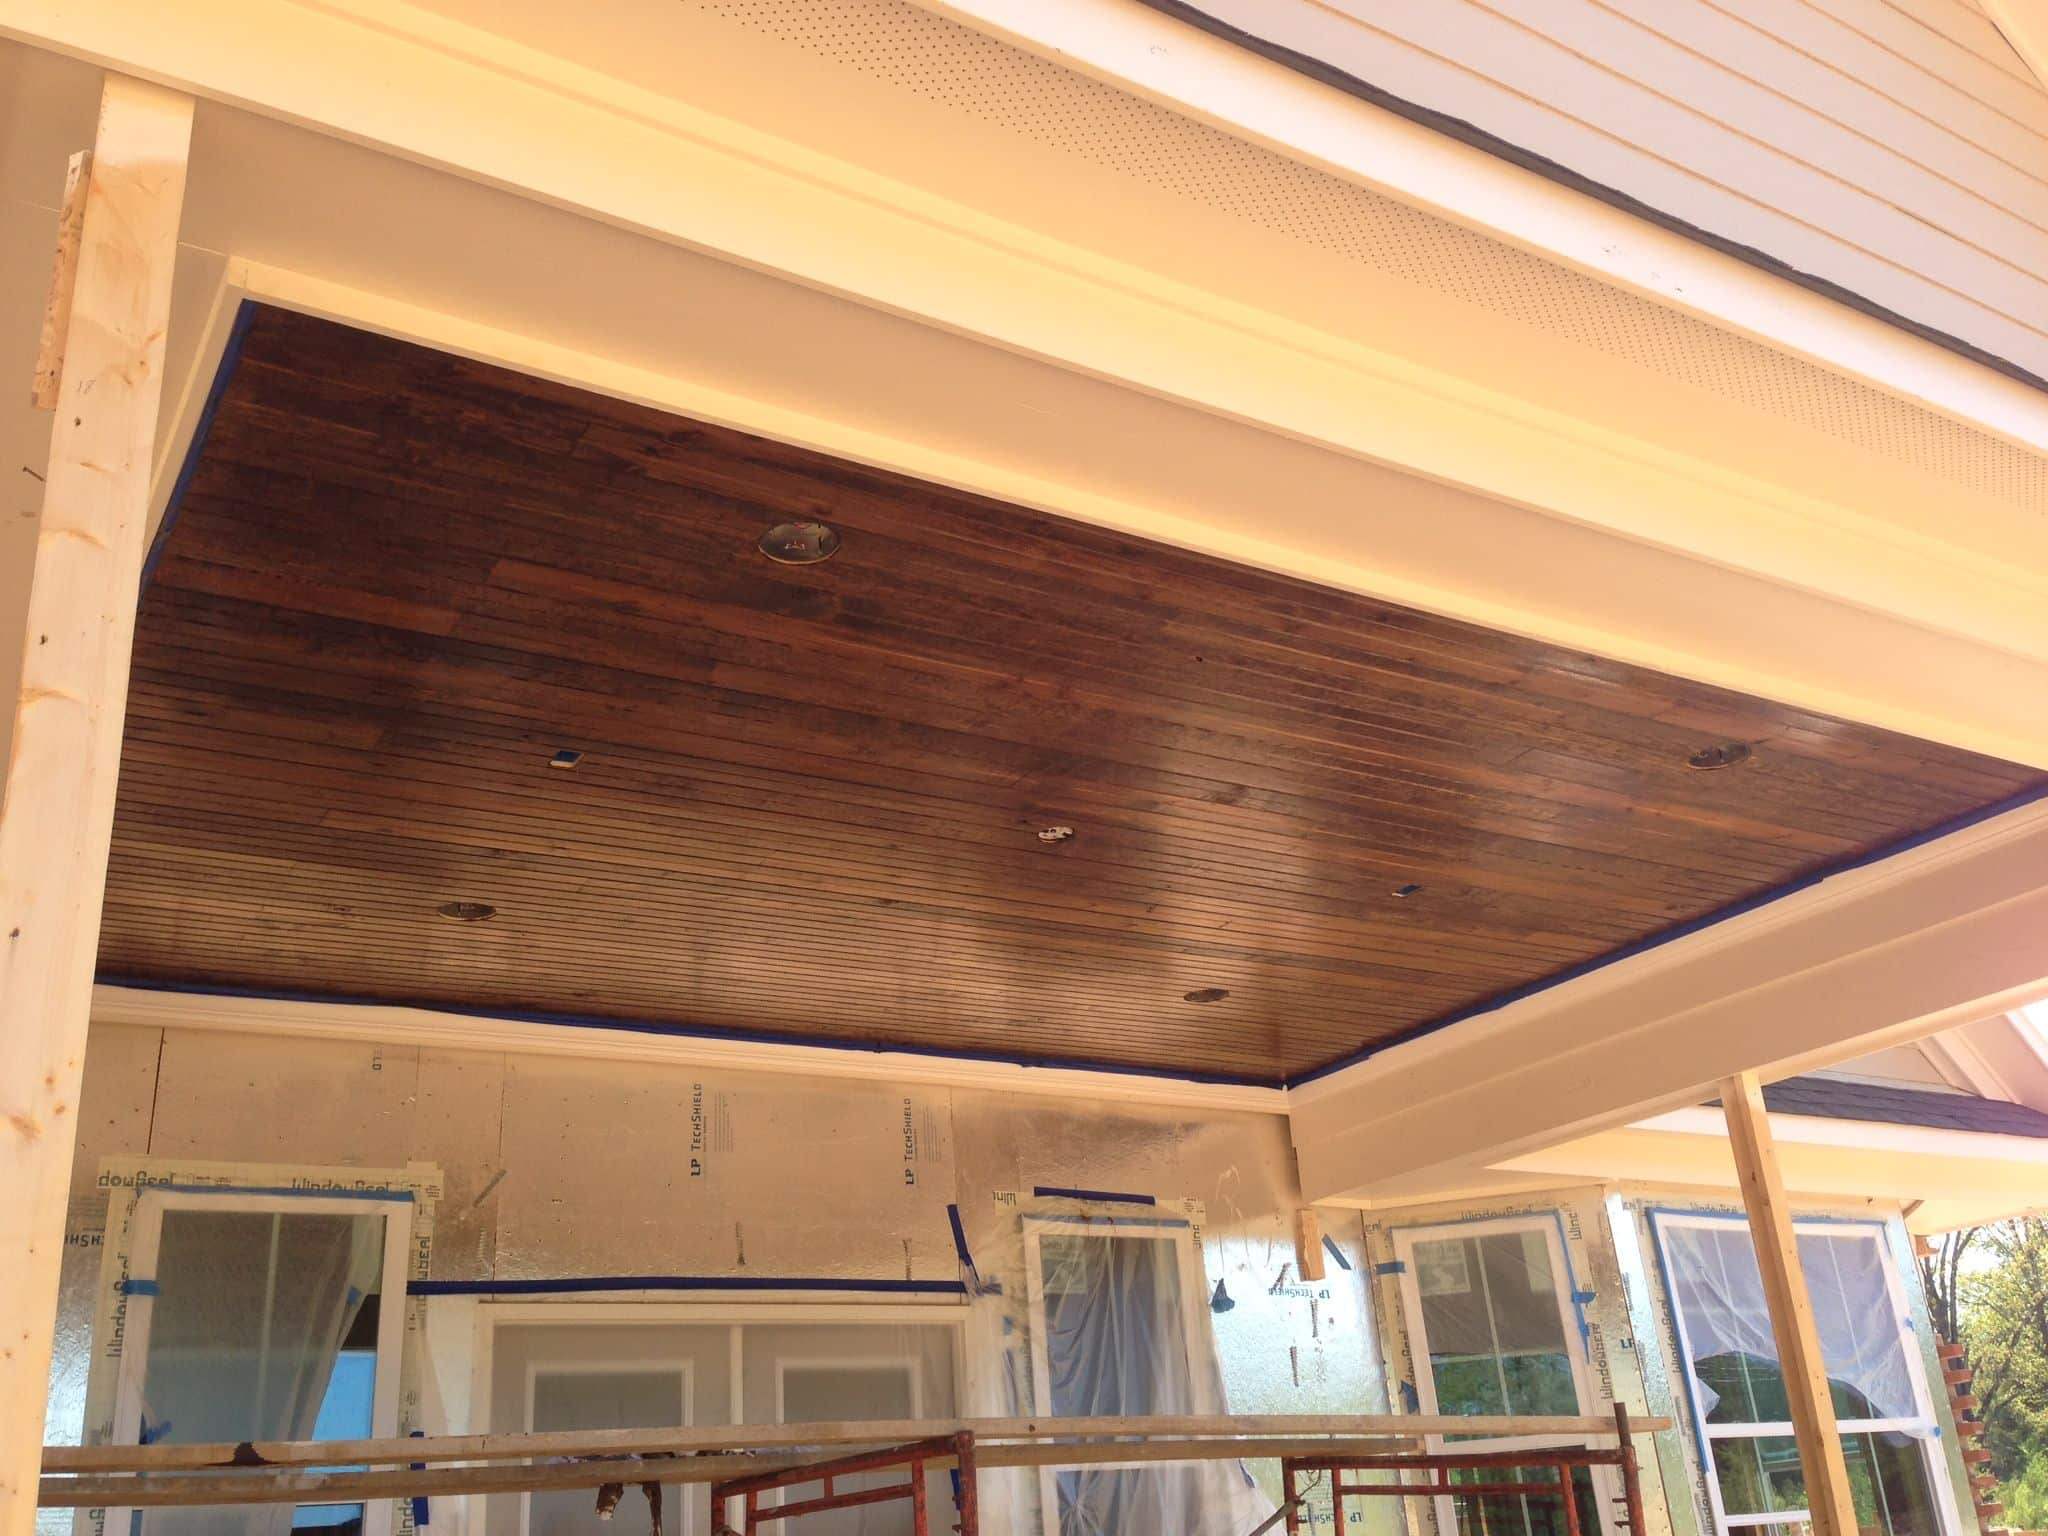 Our patio ceiling! Tongue / groove wood with a dark stain. Love it ...